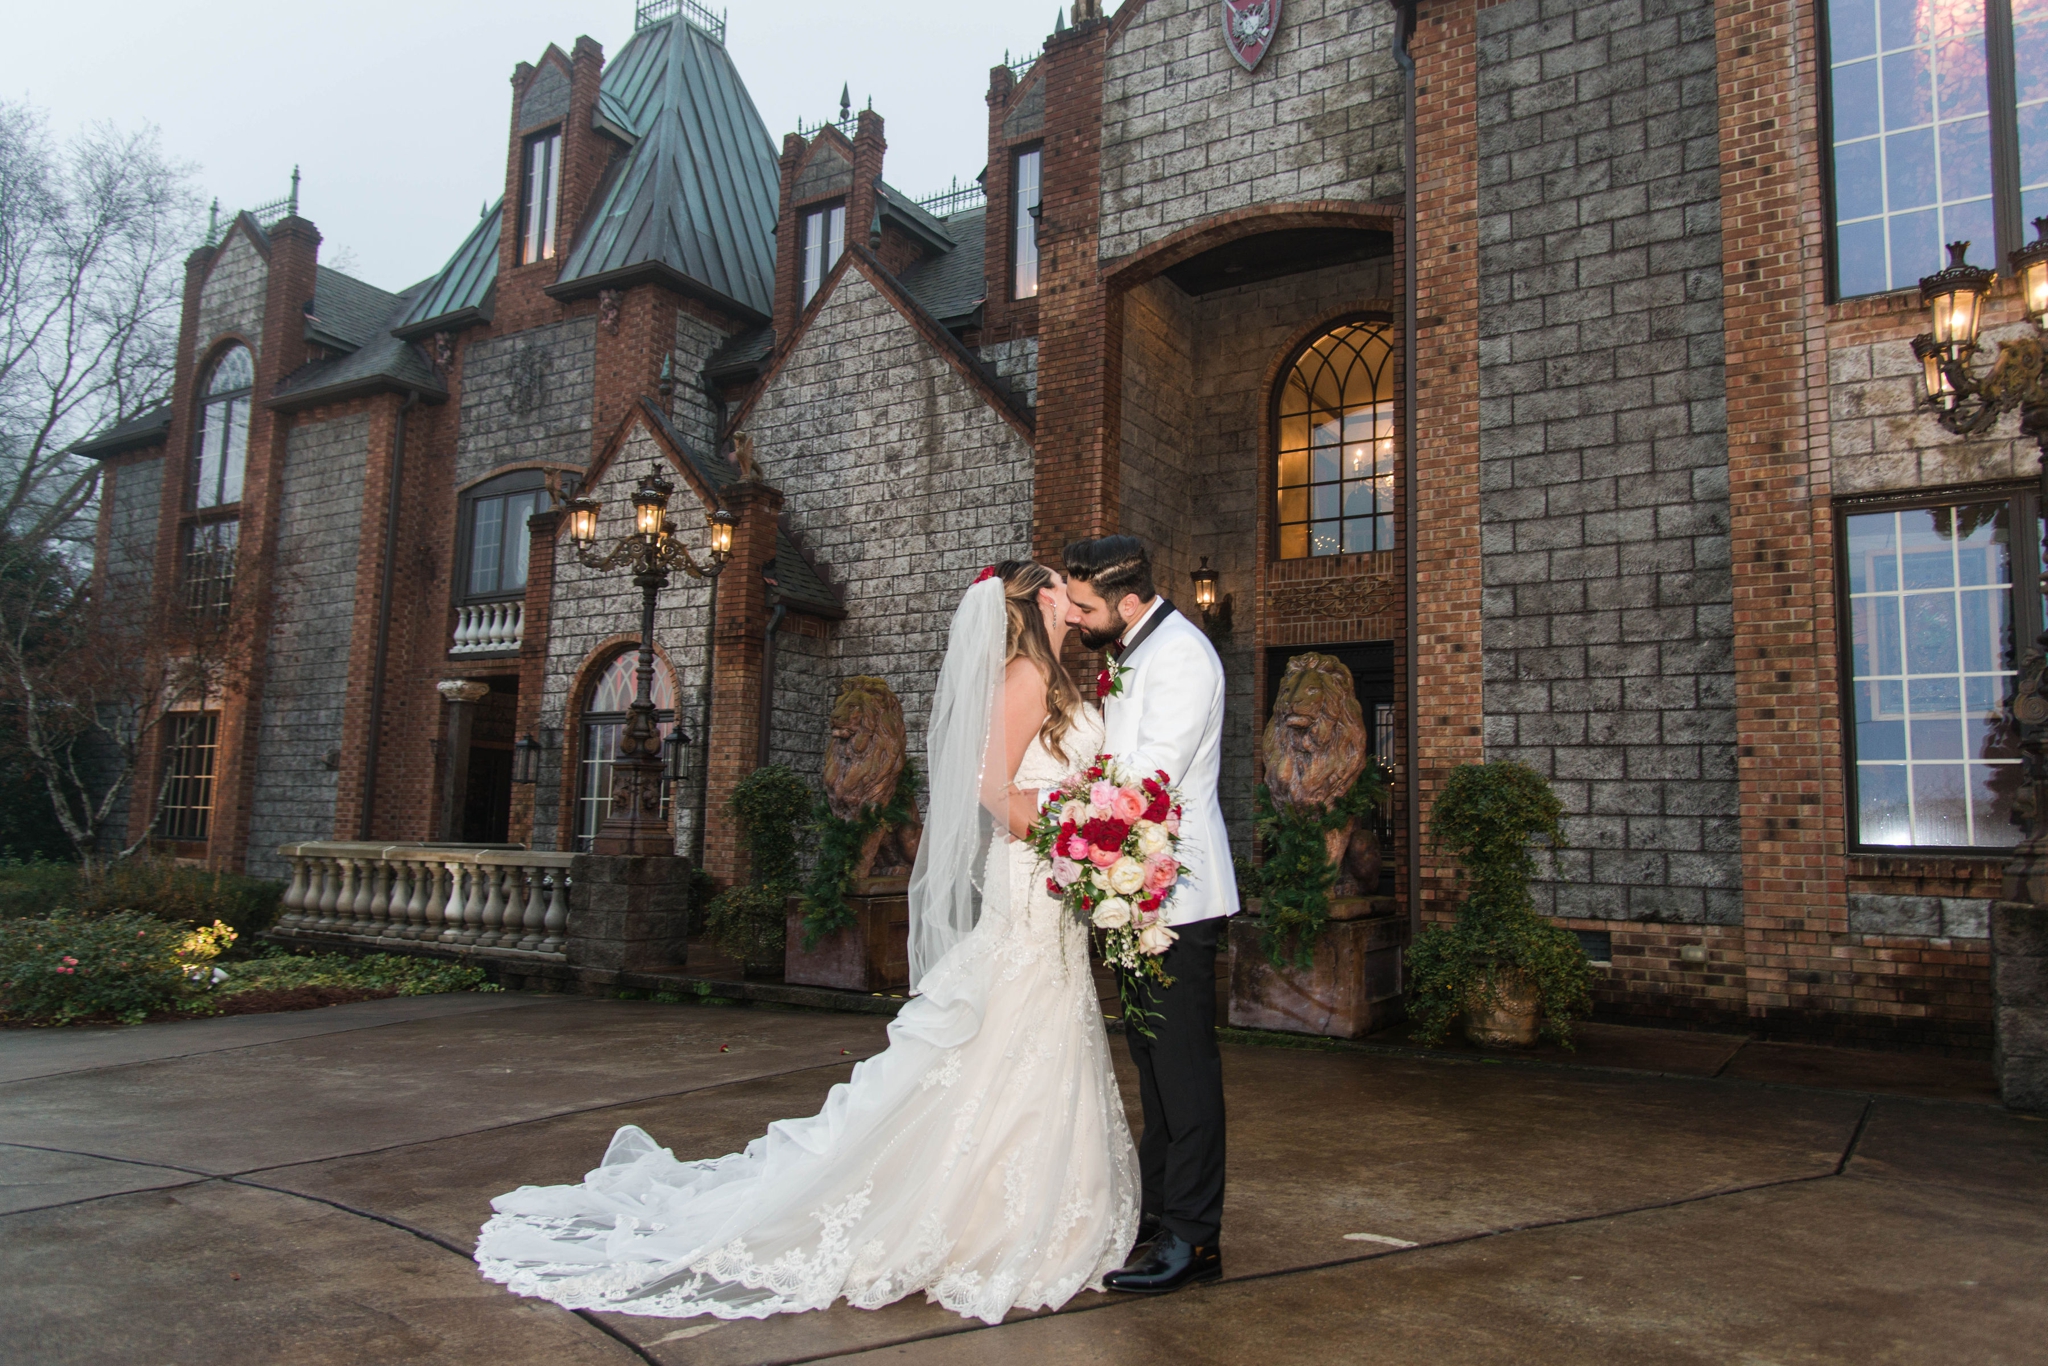 Portraits of the Bride and Groom in front of the Castle - Honolulu Oahu Hawaii Wedding Photographer